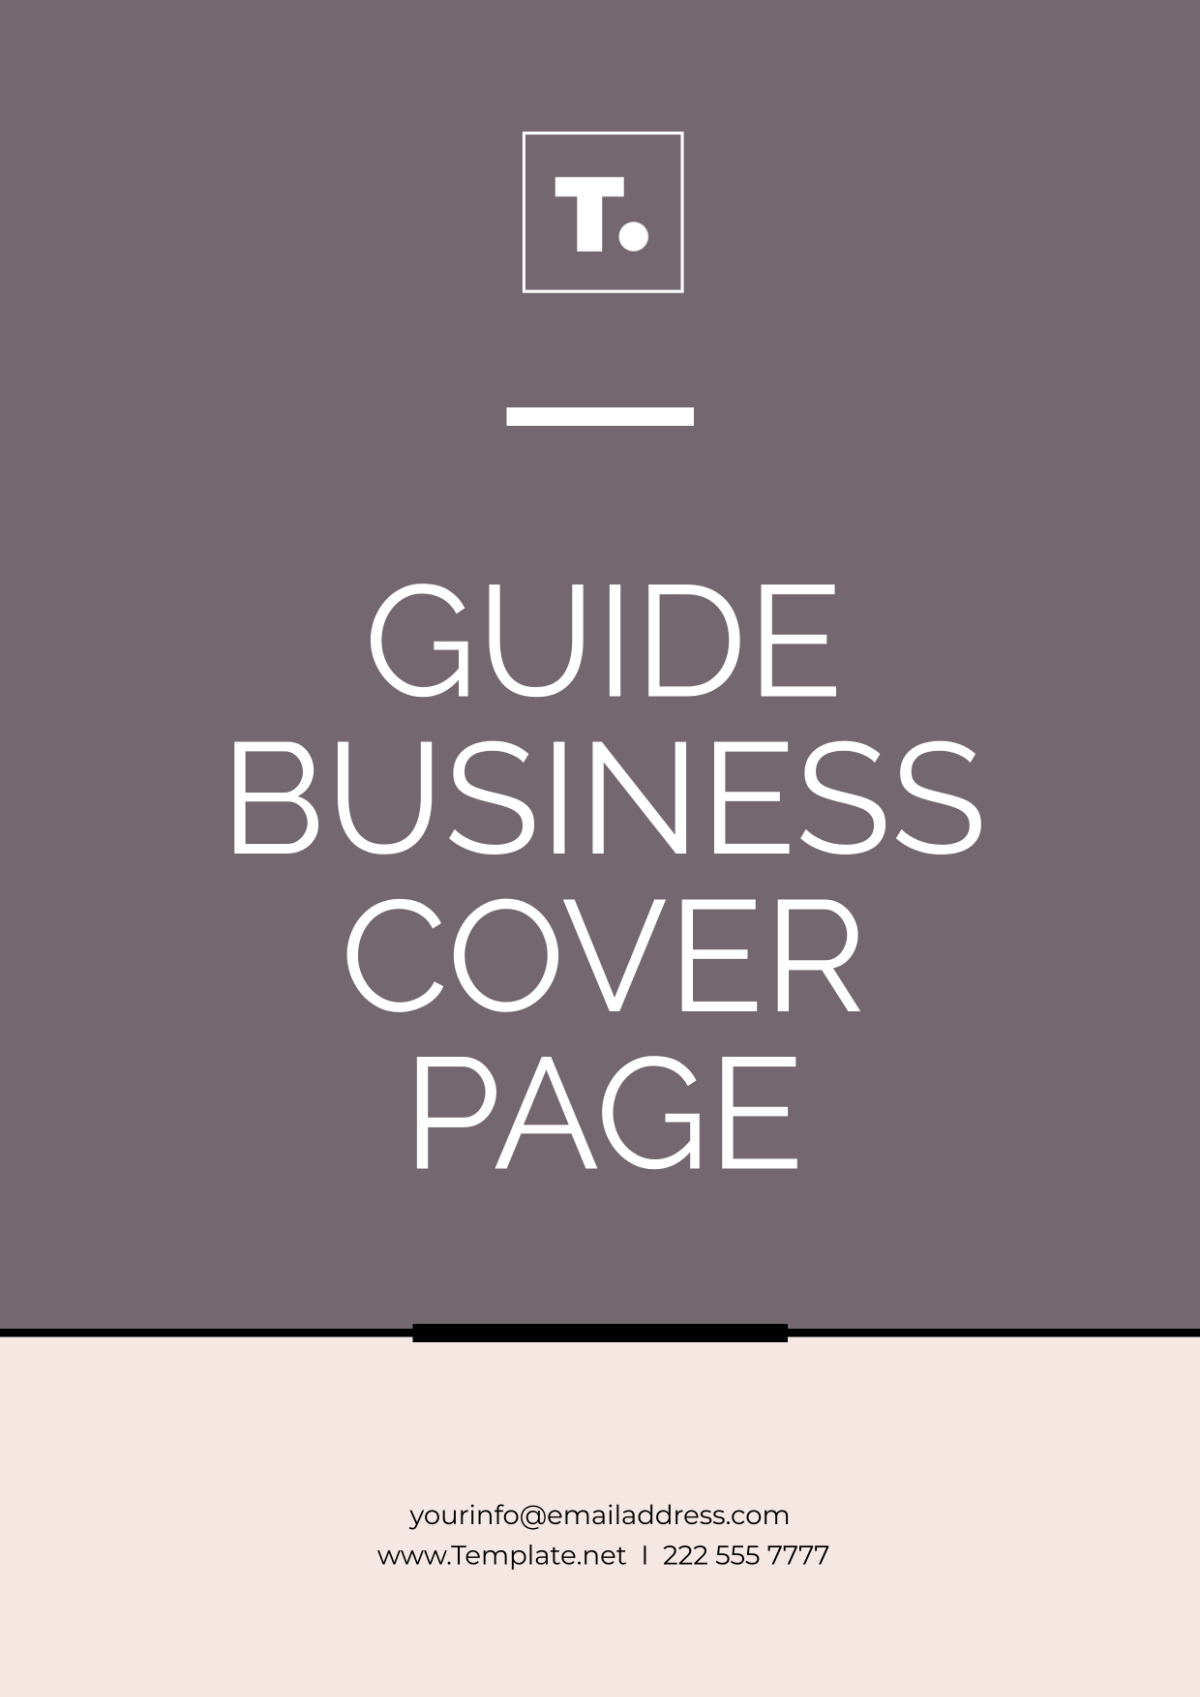 Free Guide Business Cover Page Template